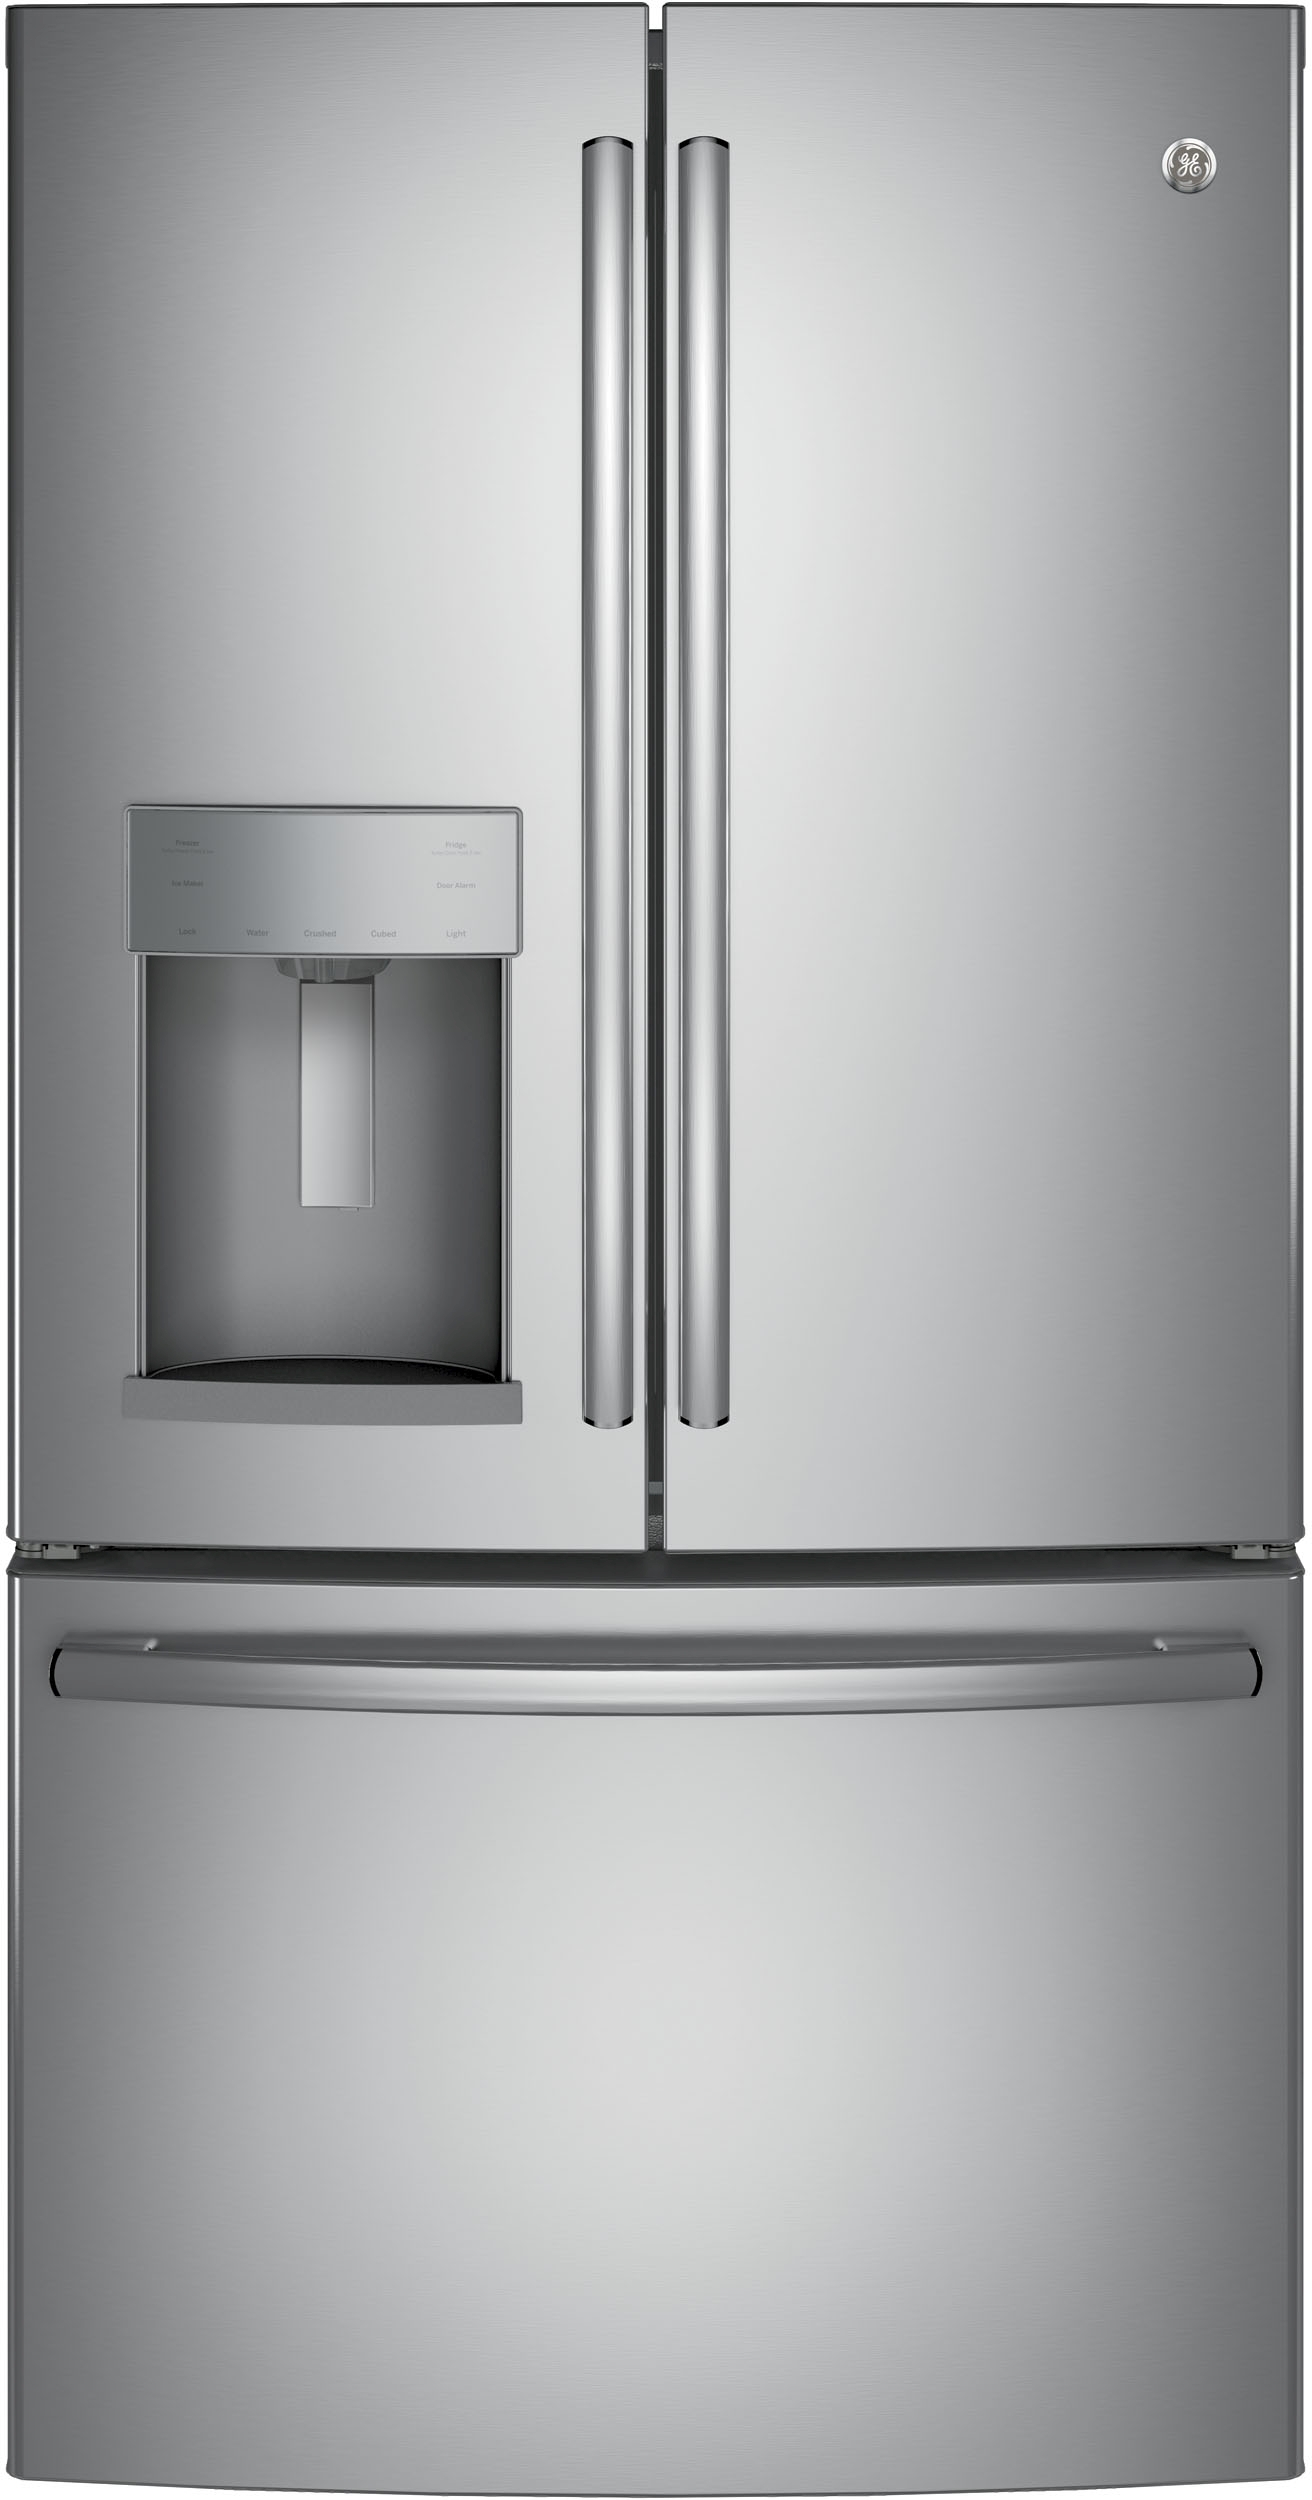 GE® 27.8 Cu. Ft. Stainless Steel French Door Refrigerator-GFD28GYNFS